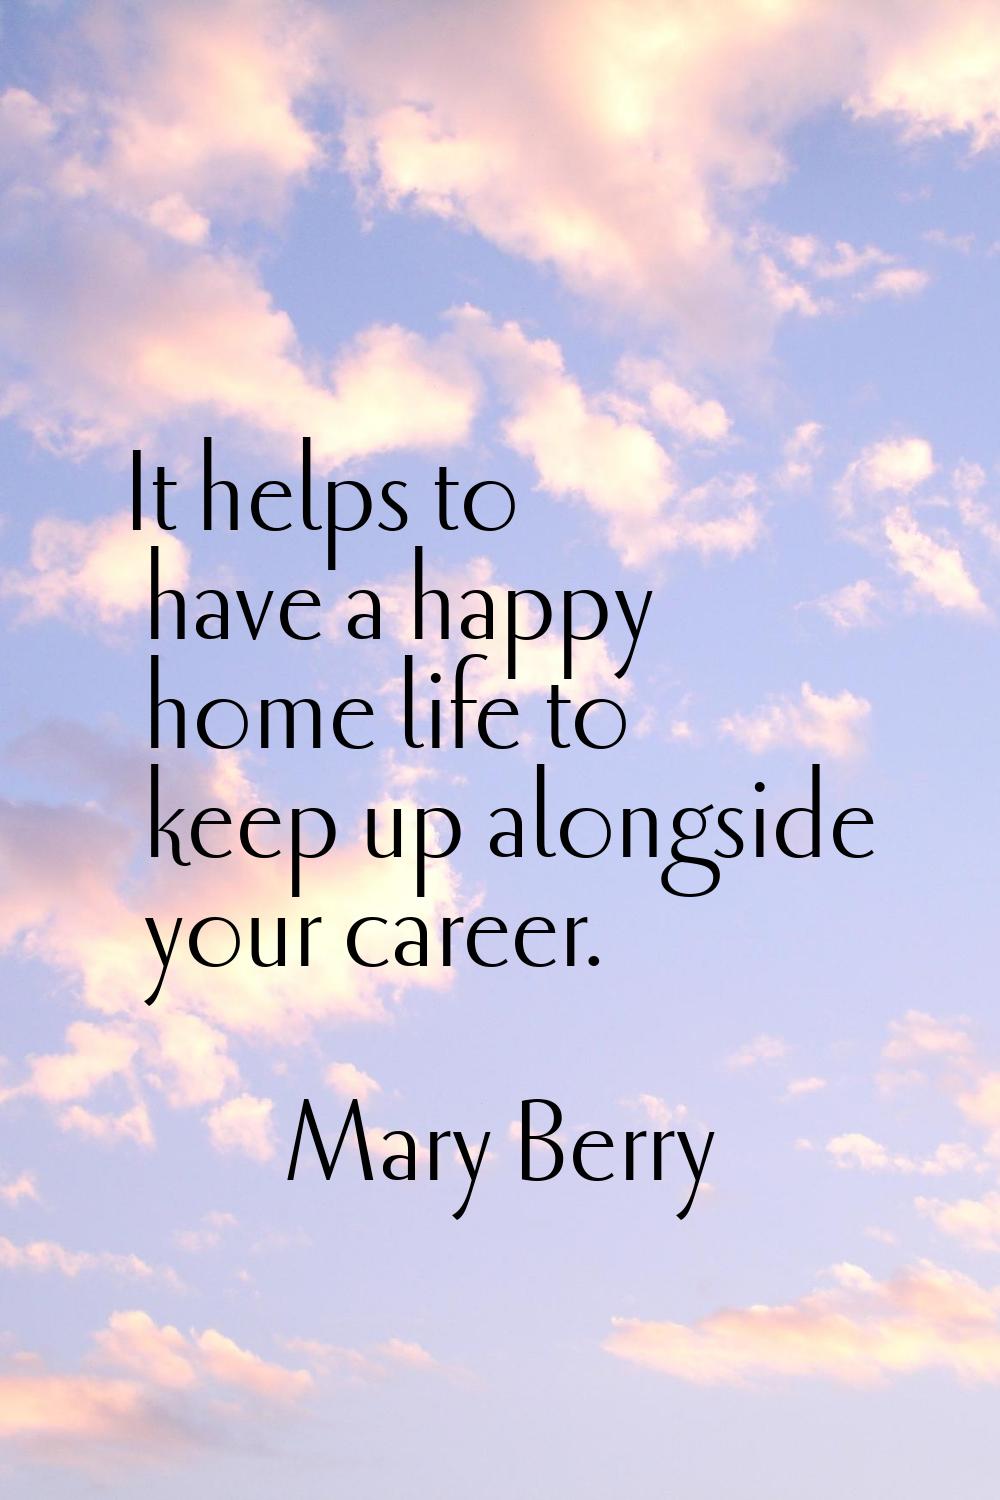 It helps to have a happy home life to keep up alongside your career.